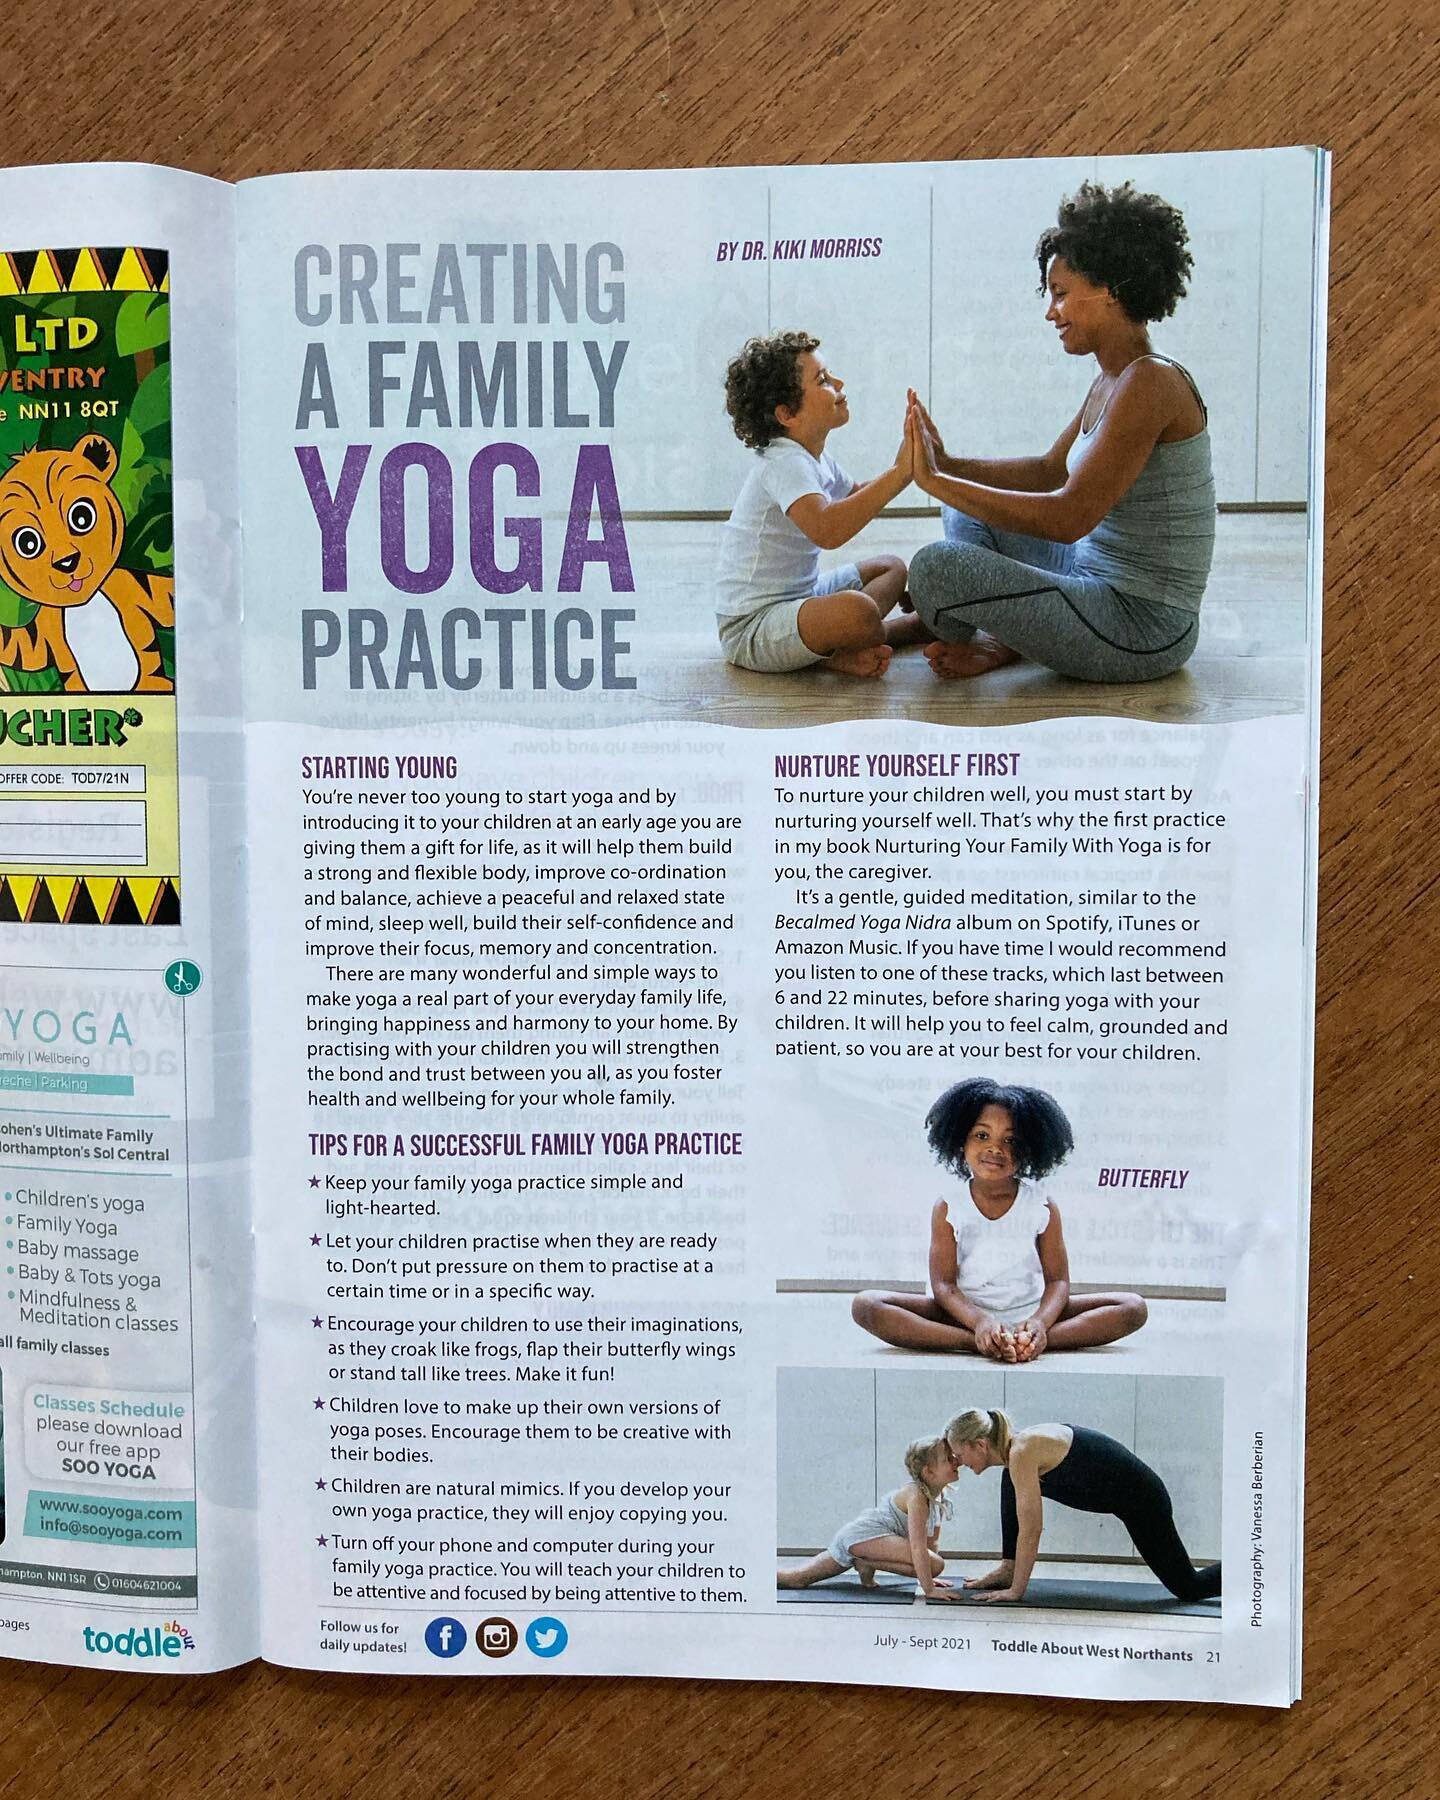 Thank you to @toddleabout magazine for supporting yoga for children &amp; families and for this lovely feature about &ldquo;Nurturing Your Family With Yoga.&rdquo; #yogaforkids #familyyoga #kidsyoga #pinterandmartin #toddleabout